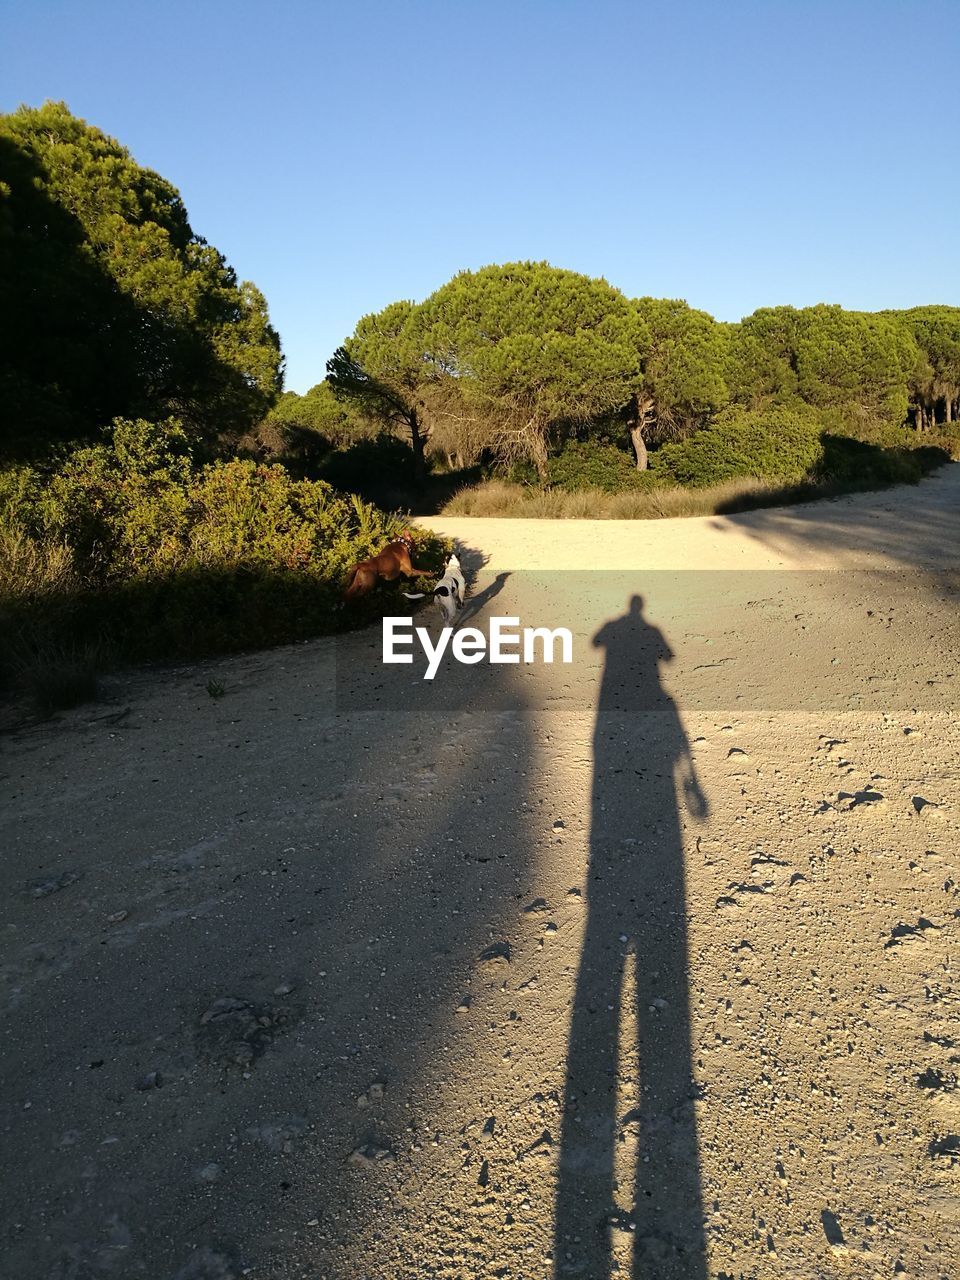 Shadow of man on dirt road against clear sky